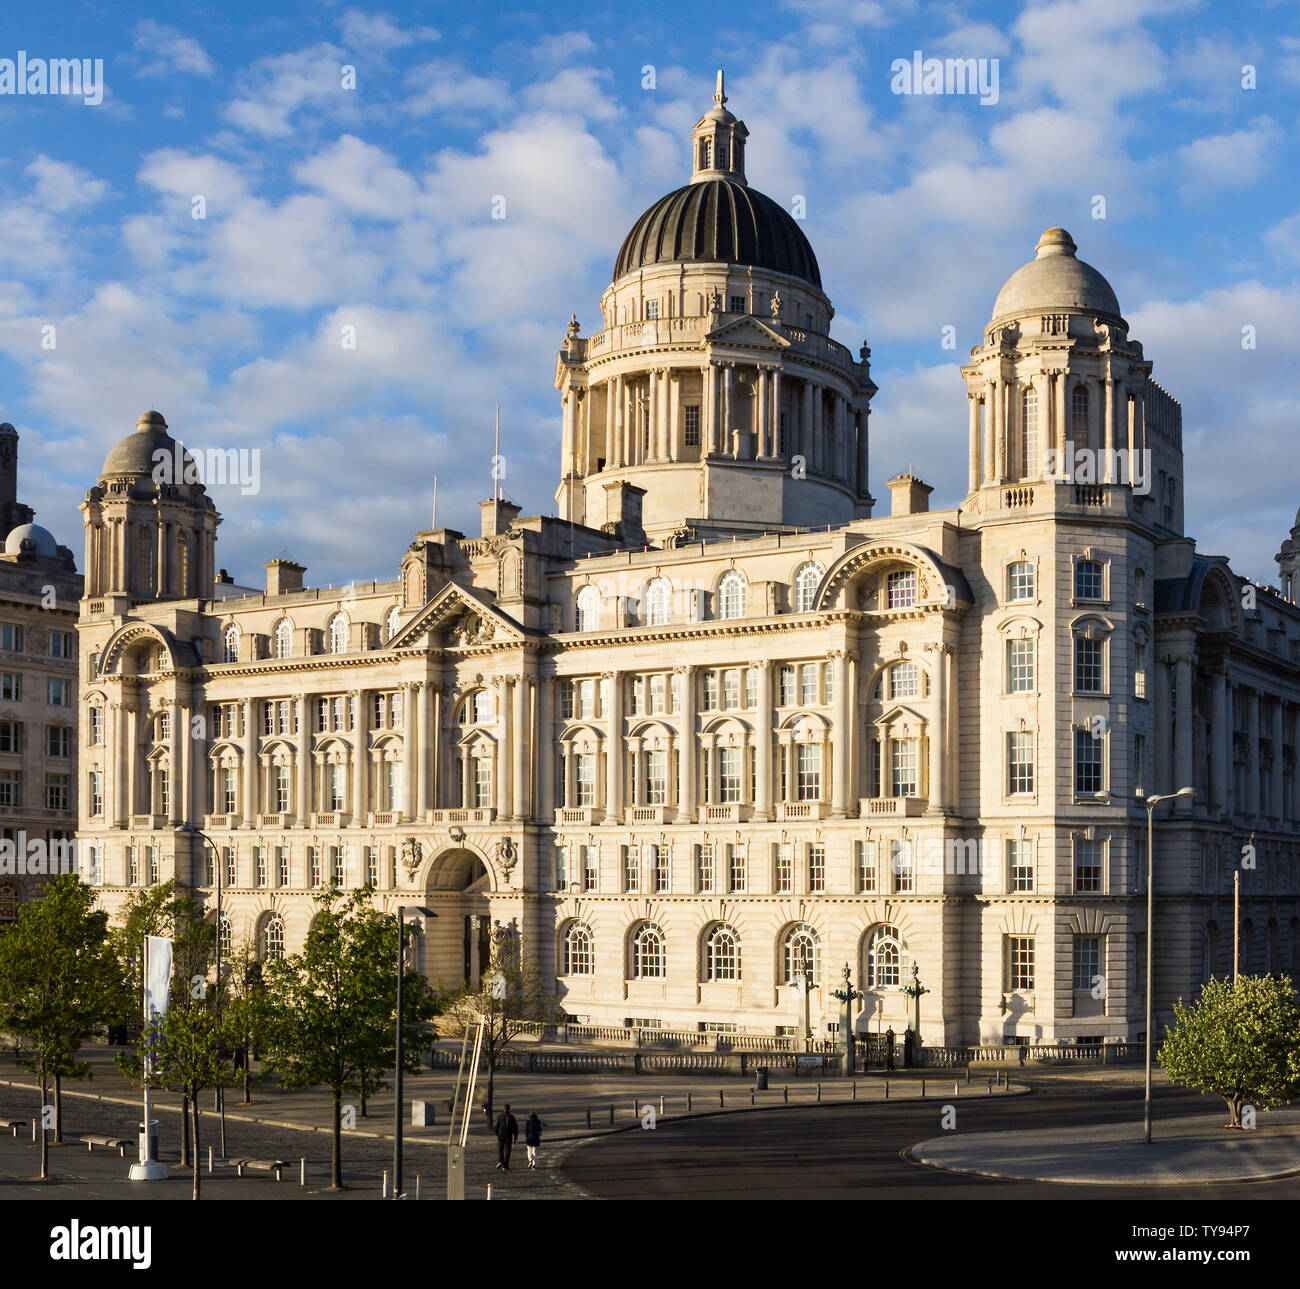 The Port of Liverpool Building, part of the pier head area of the River Mersey waterfront, comprising three buildings, known as The Three Graces. Stock Photo